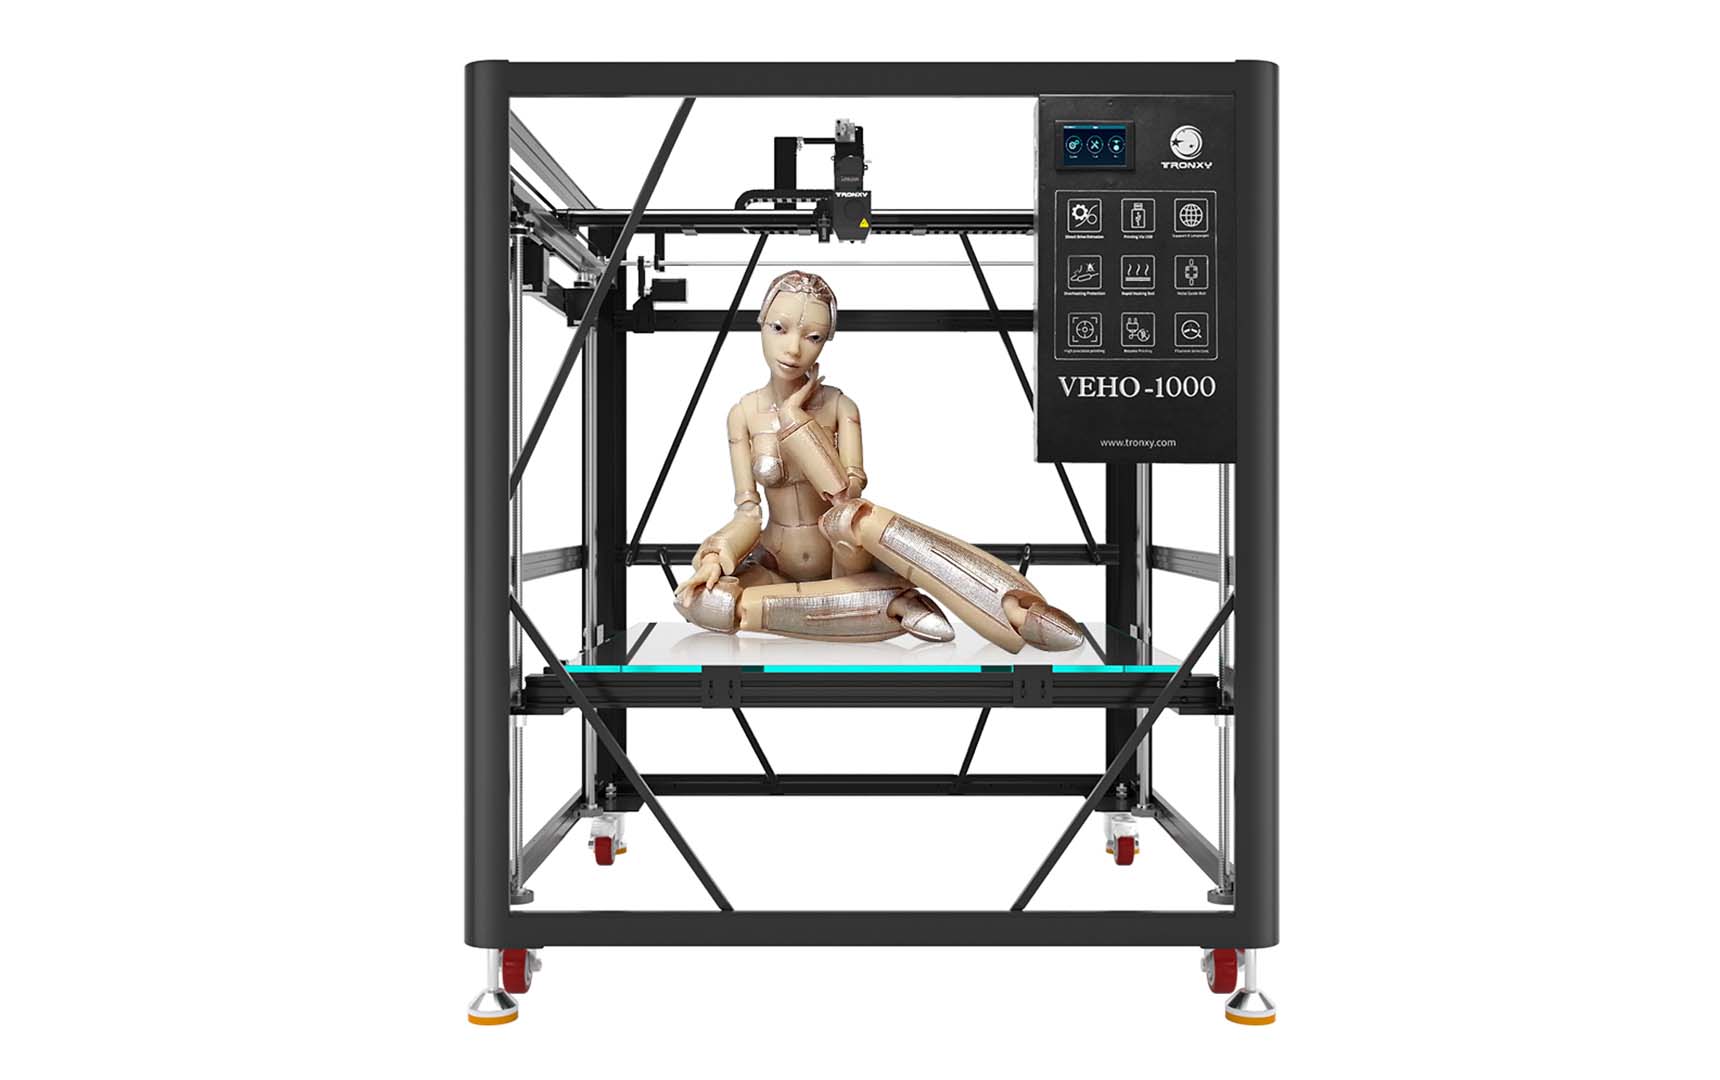 Introducing the TRONXY VEHO 1000 3D Printer: Unleashing Creativity in Every Layer